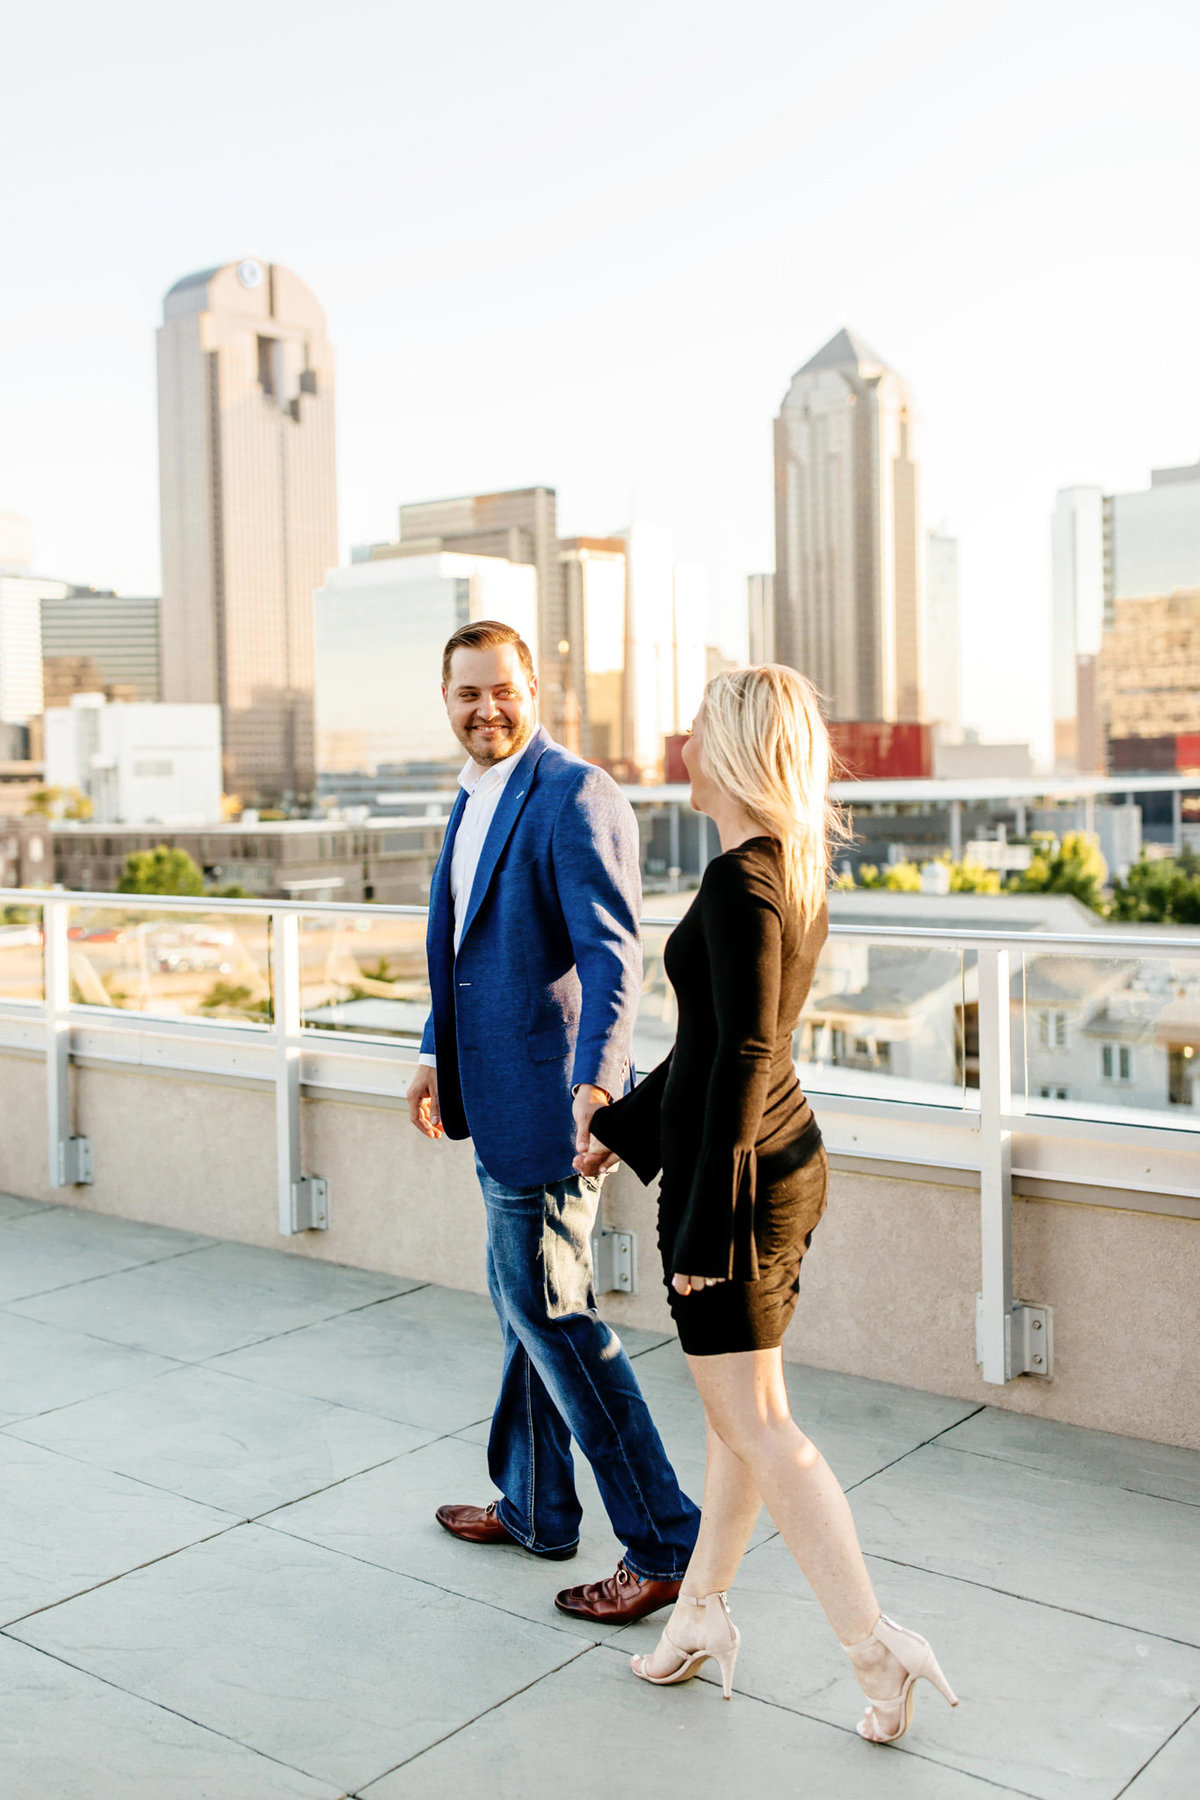 Eric & Megan - Downtown Dallas Rooftop Proposal & Engagement Session-74